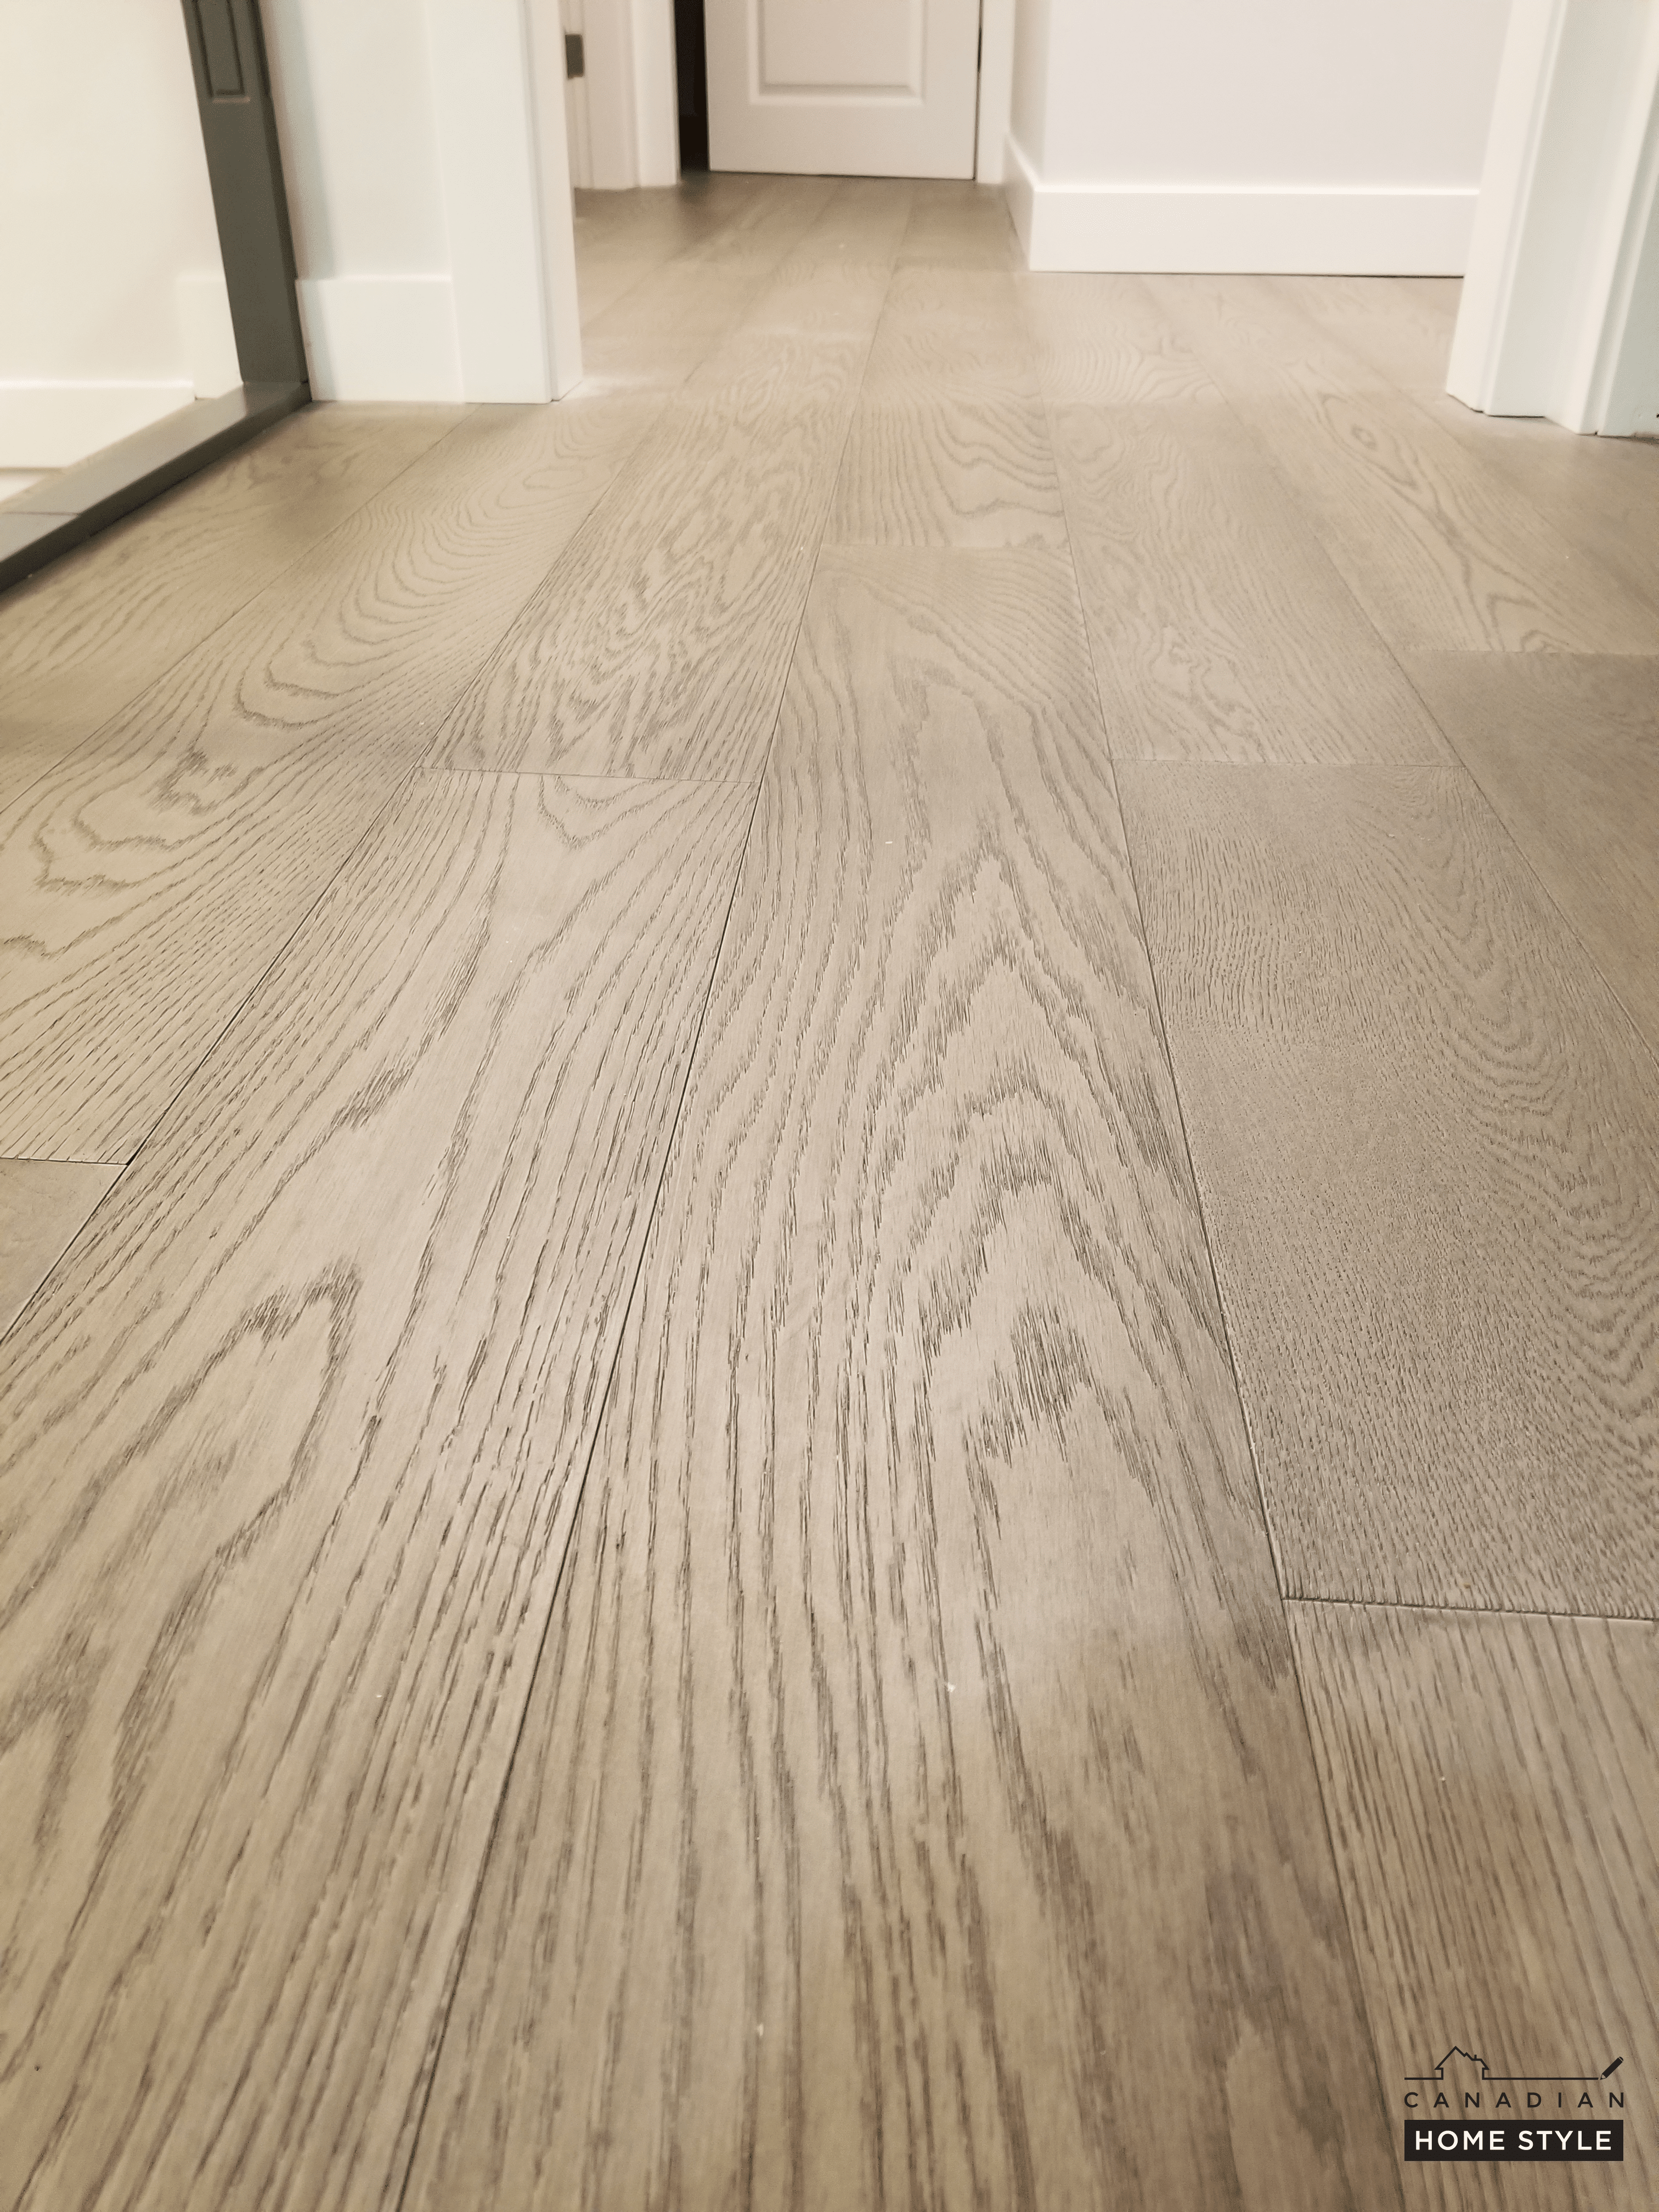 High-performance Vancouver wooden flooring options